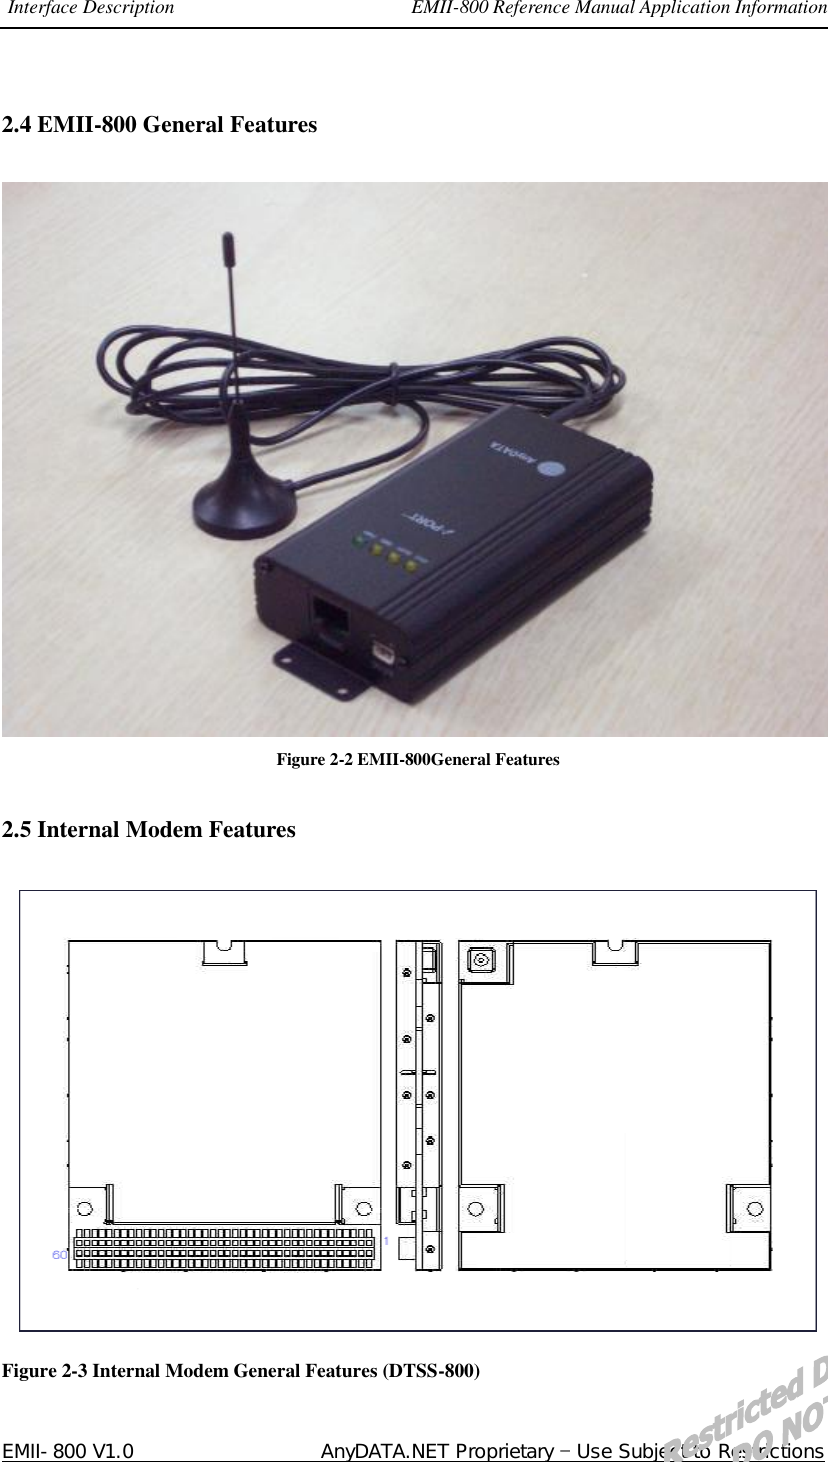 Interface Description                        EMII-800 Reference Manual Application Information  EMII-800 V1.0                   AnyDATA.NET Proprietary  Use Subject to Restrictions 2.4 EMII-800 General Features     Figure 2-2 EMII-800General Features  2.5 Internal Modem Features   Figure 2-3 Internal Modem General Features (DTSS-800) 